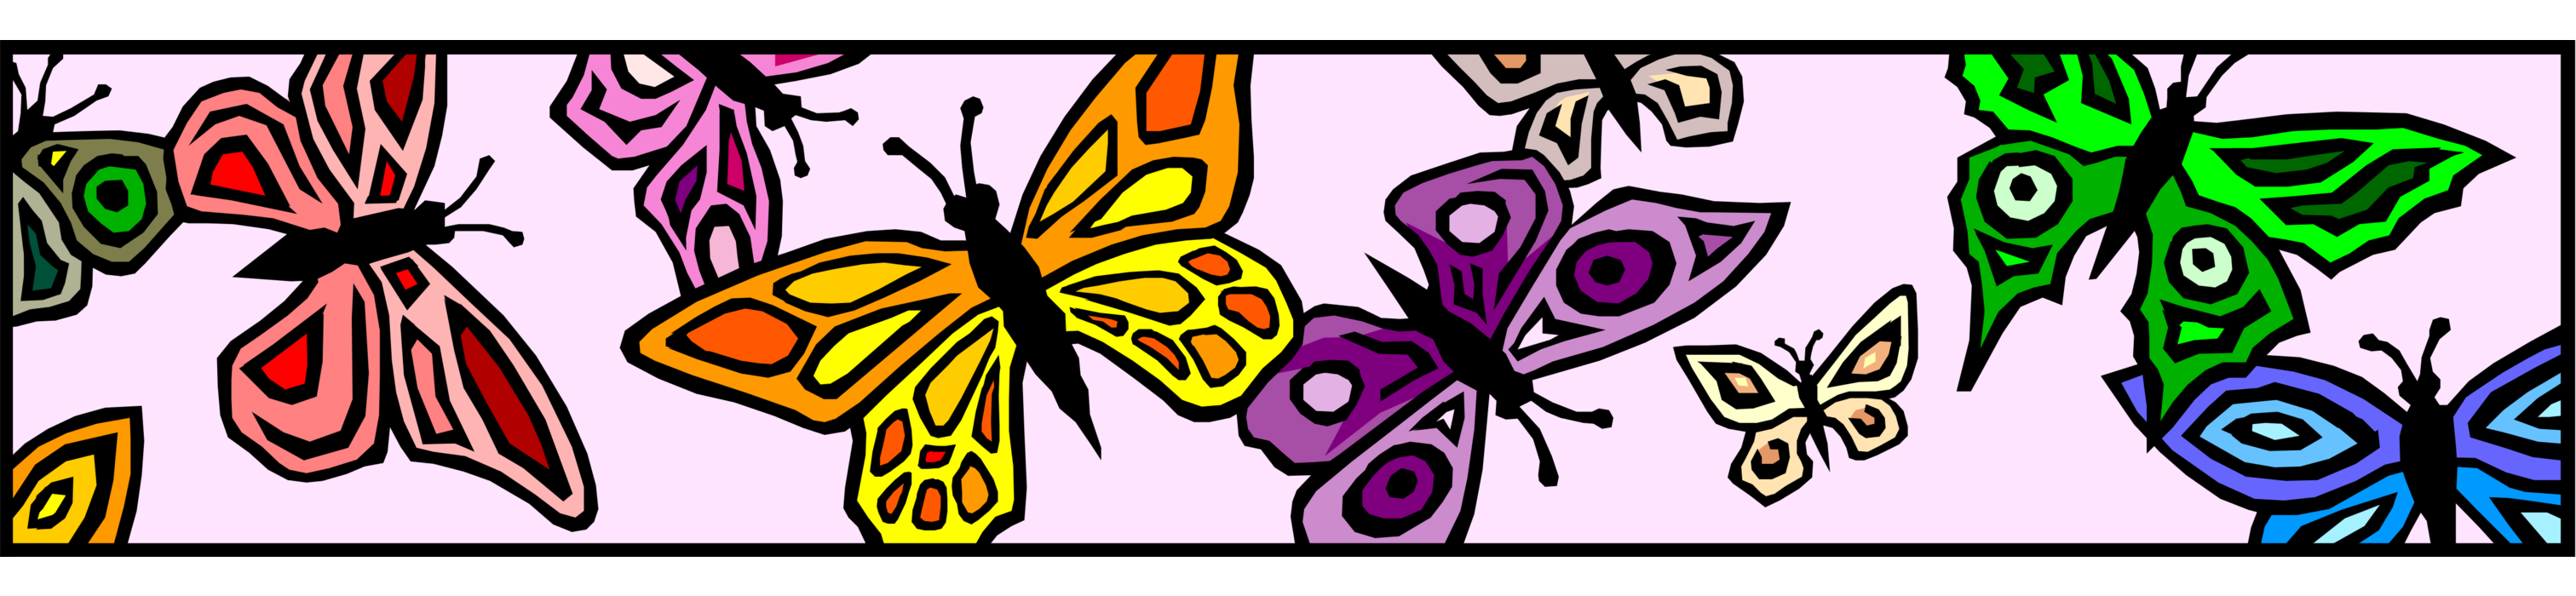 Vector Illustration of Colorful Butterflies Banner